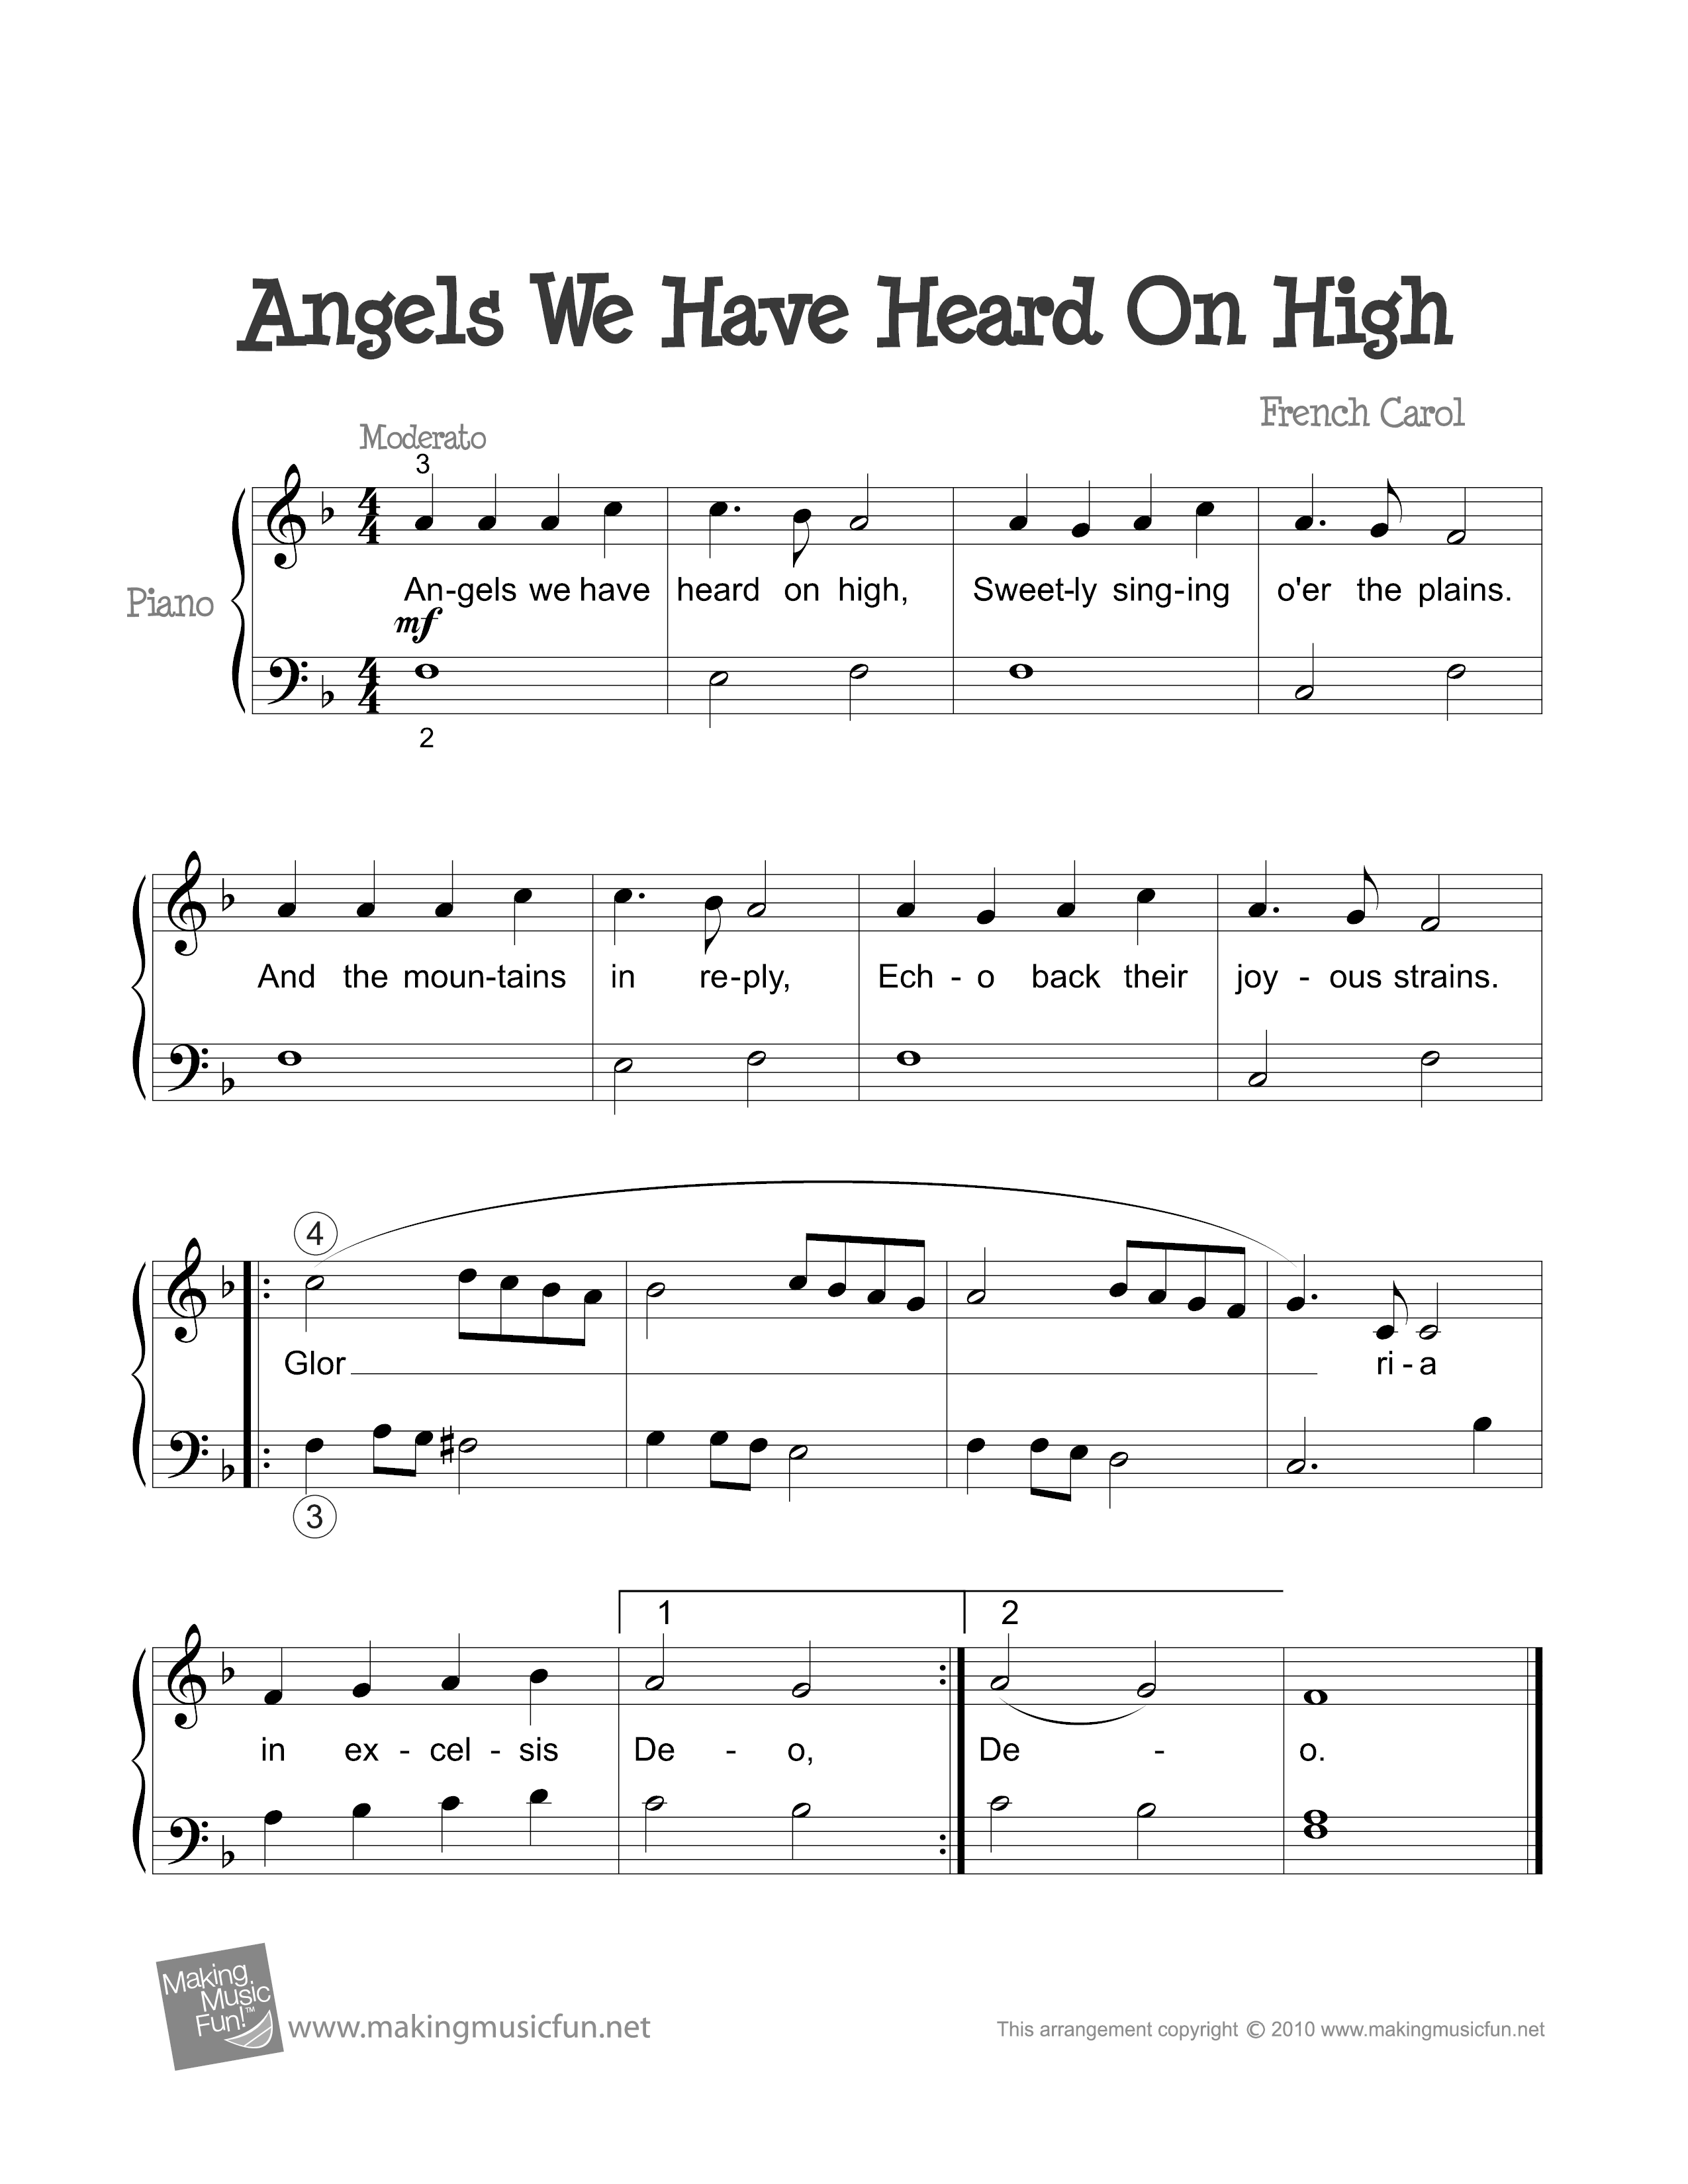 Angels We Have Heard On High Score